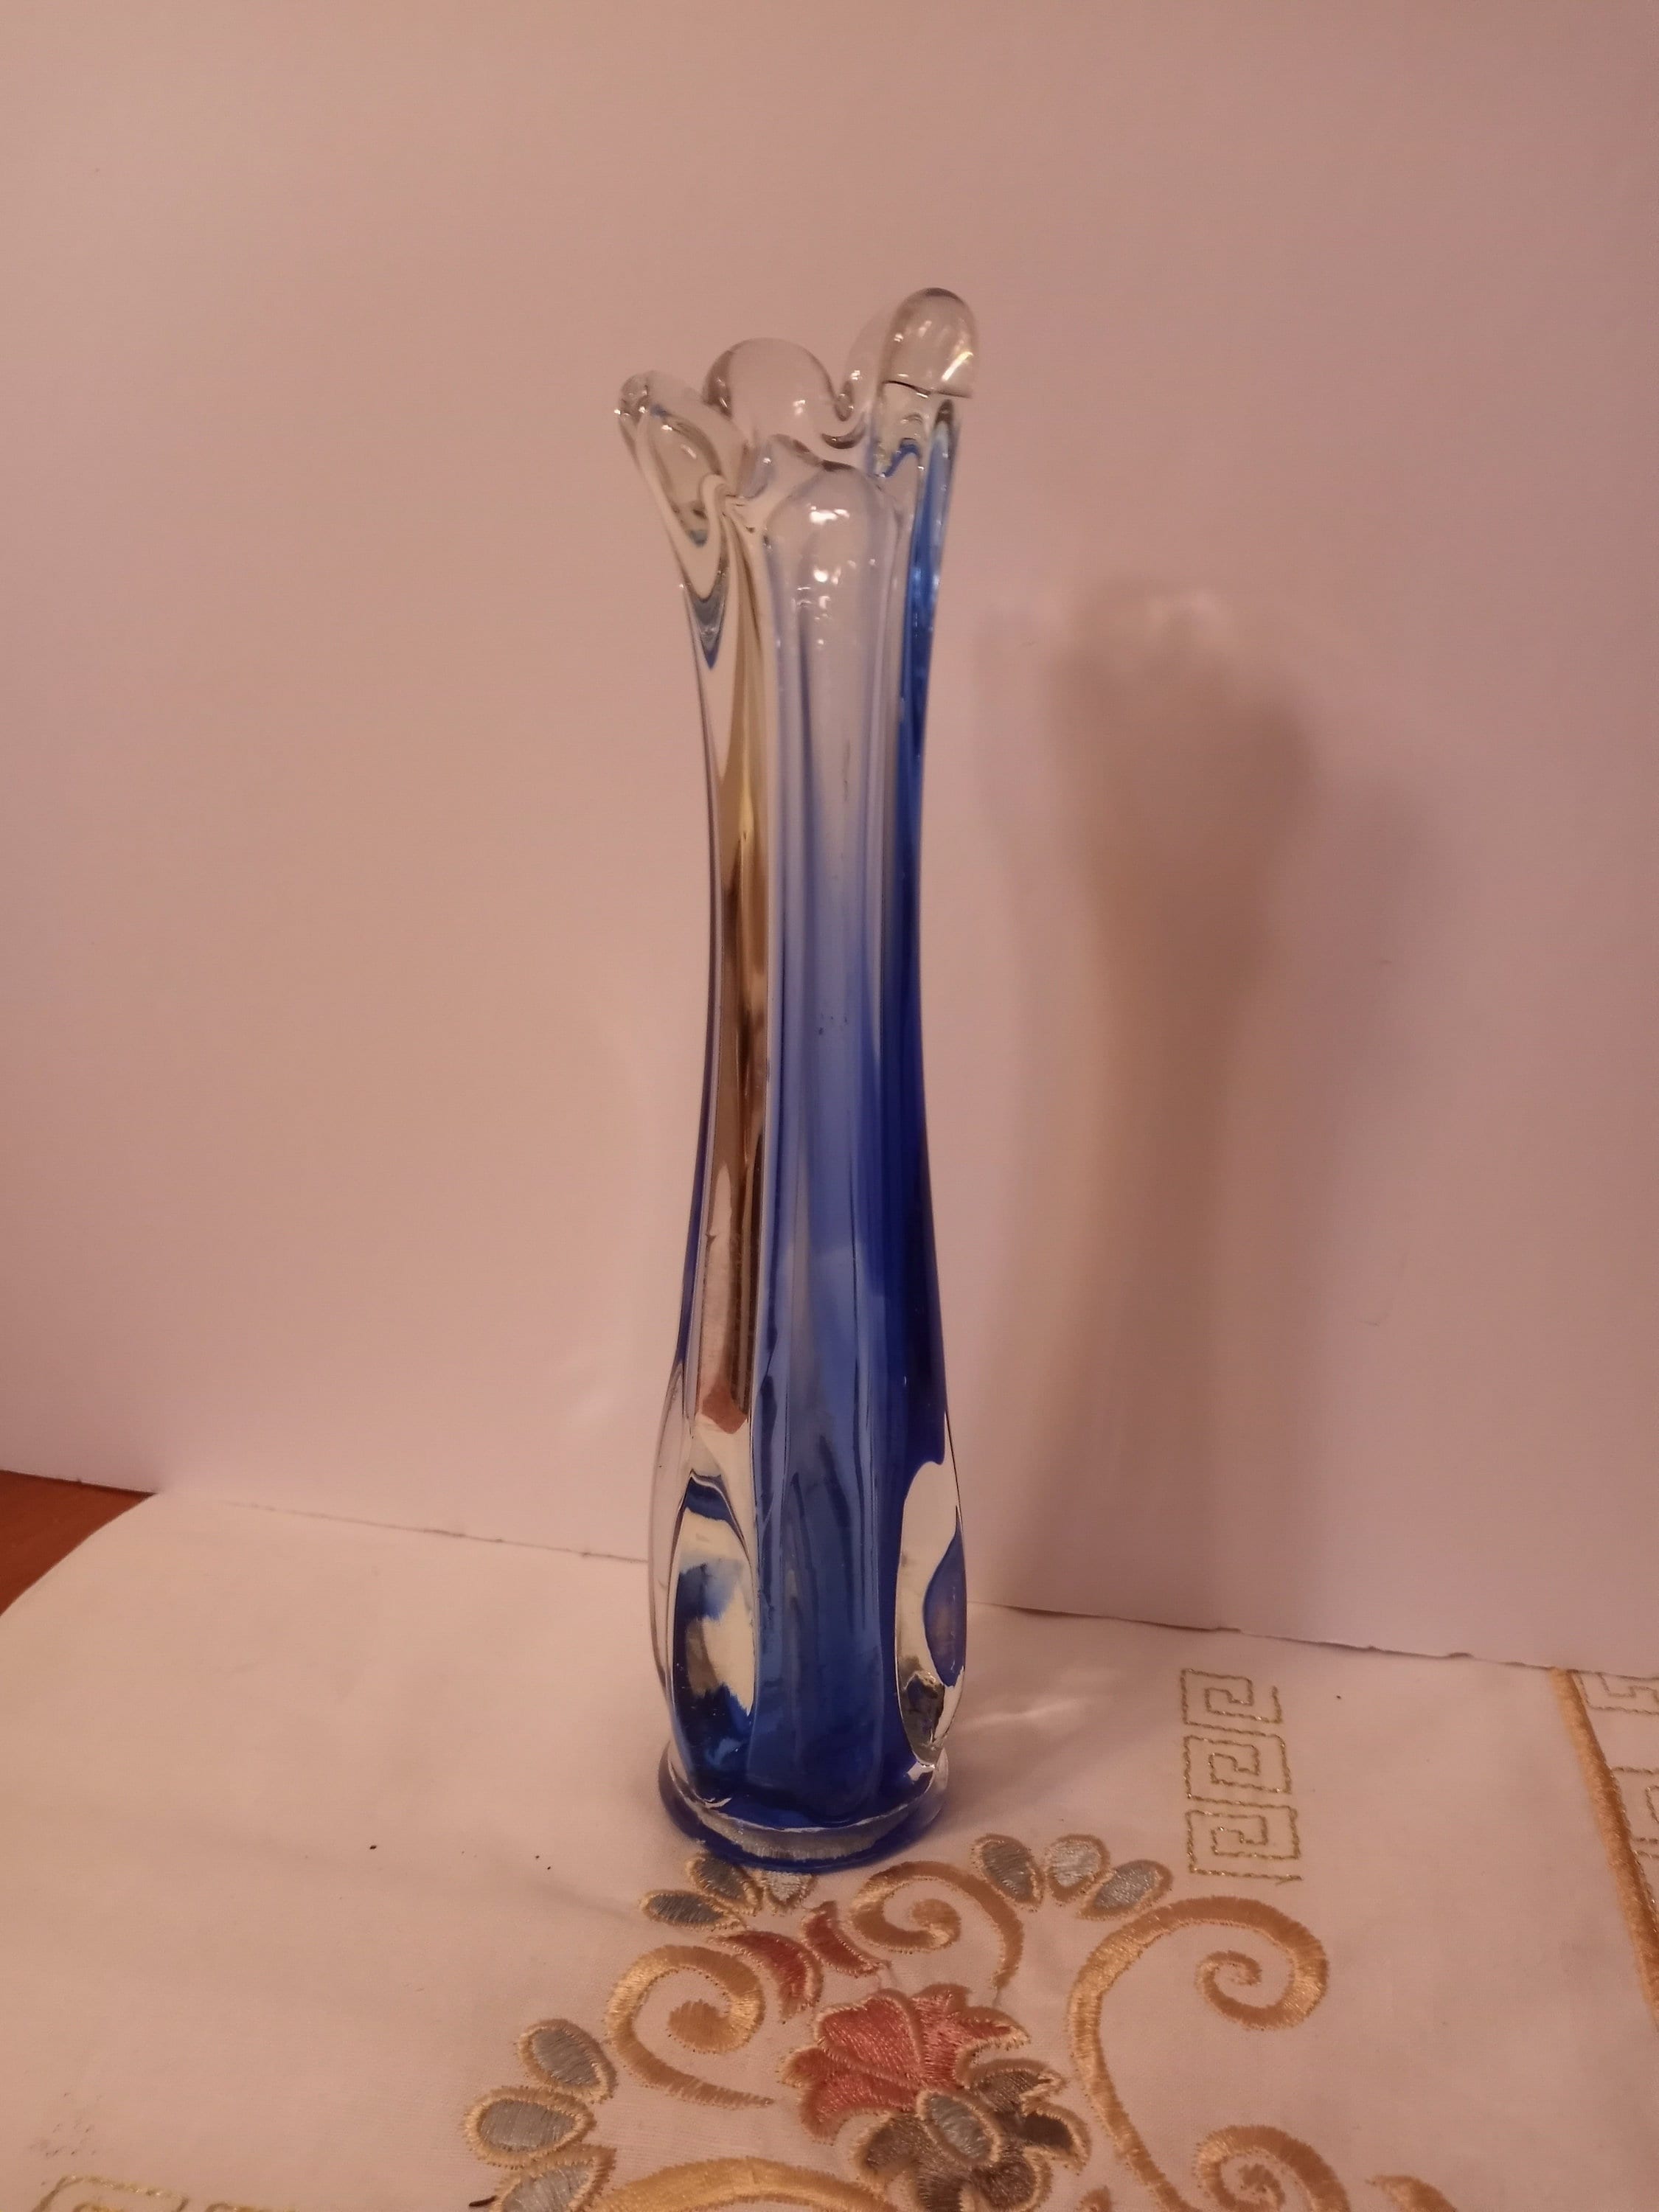 Murano Tall Hand Blown Glass Vase Blue Sommerso Fused Art Sculpture 8" 